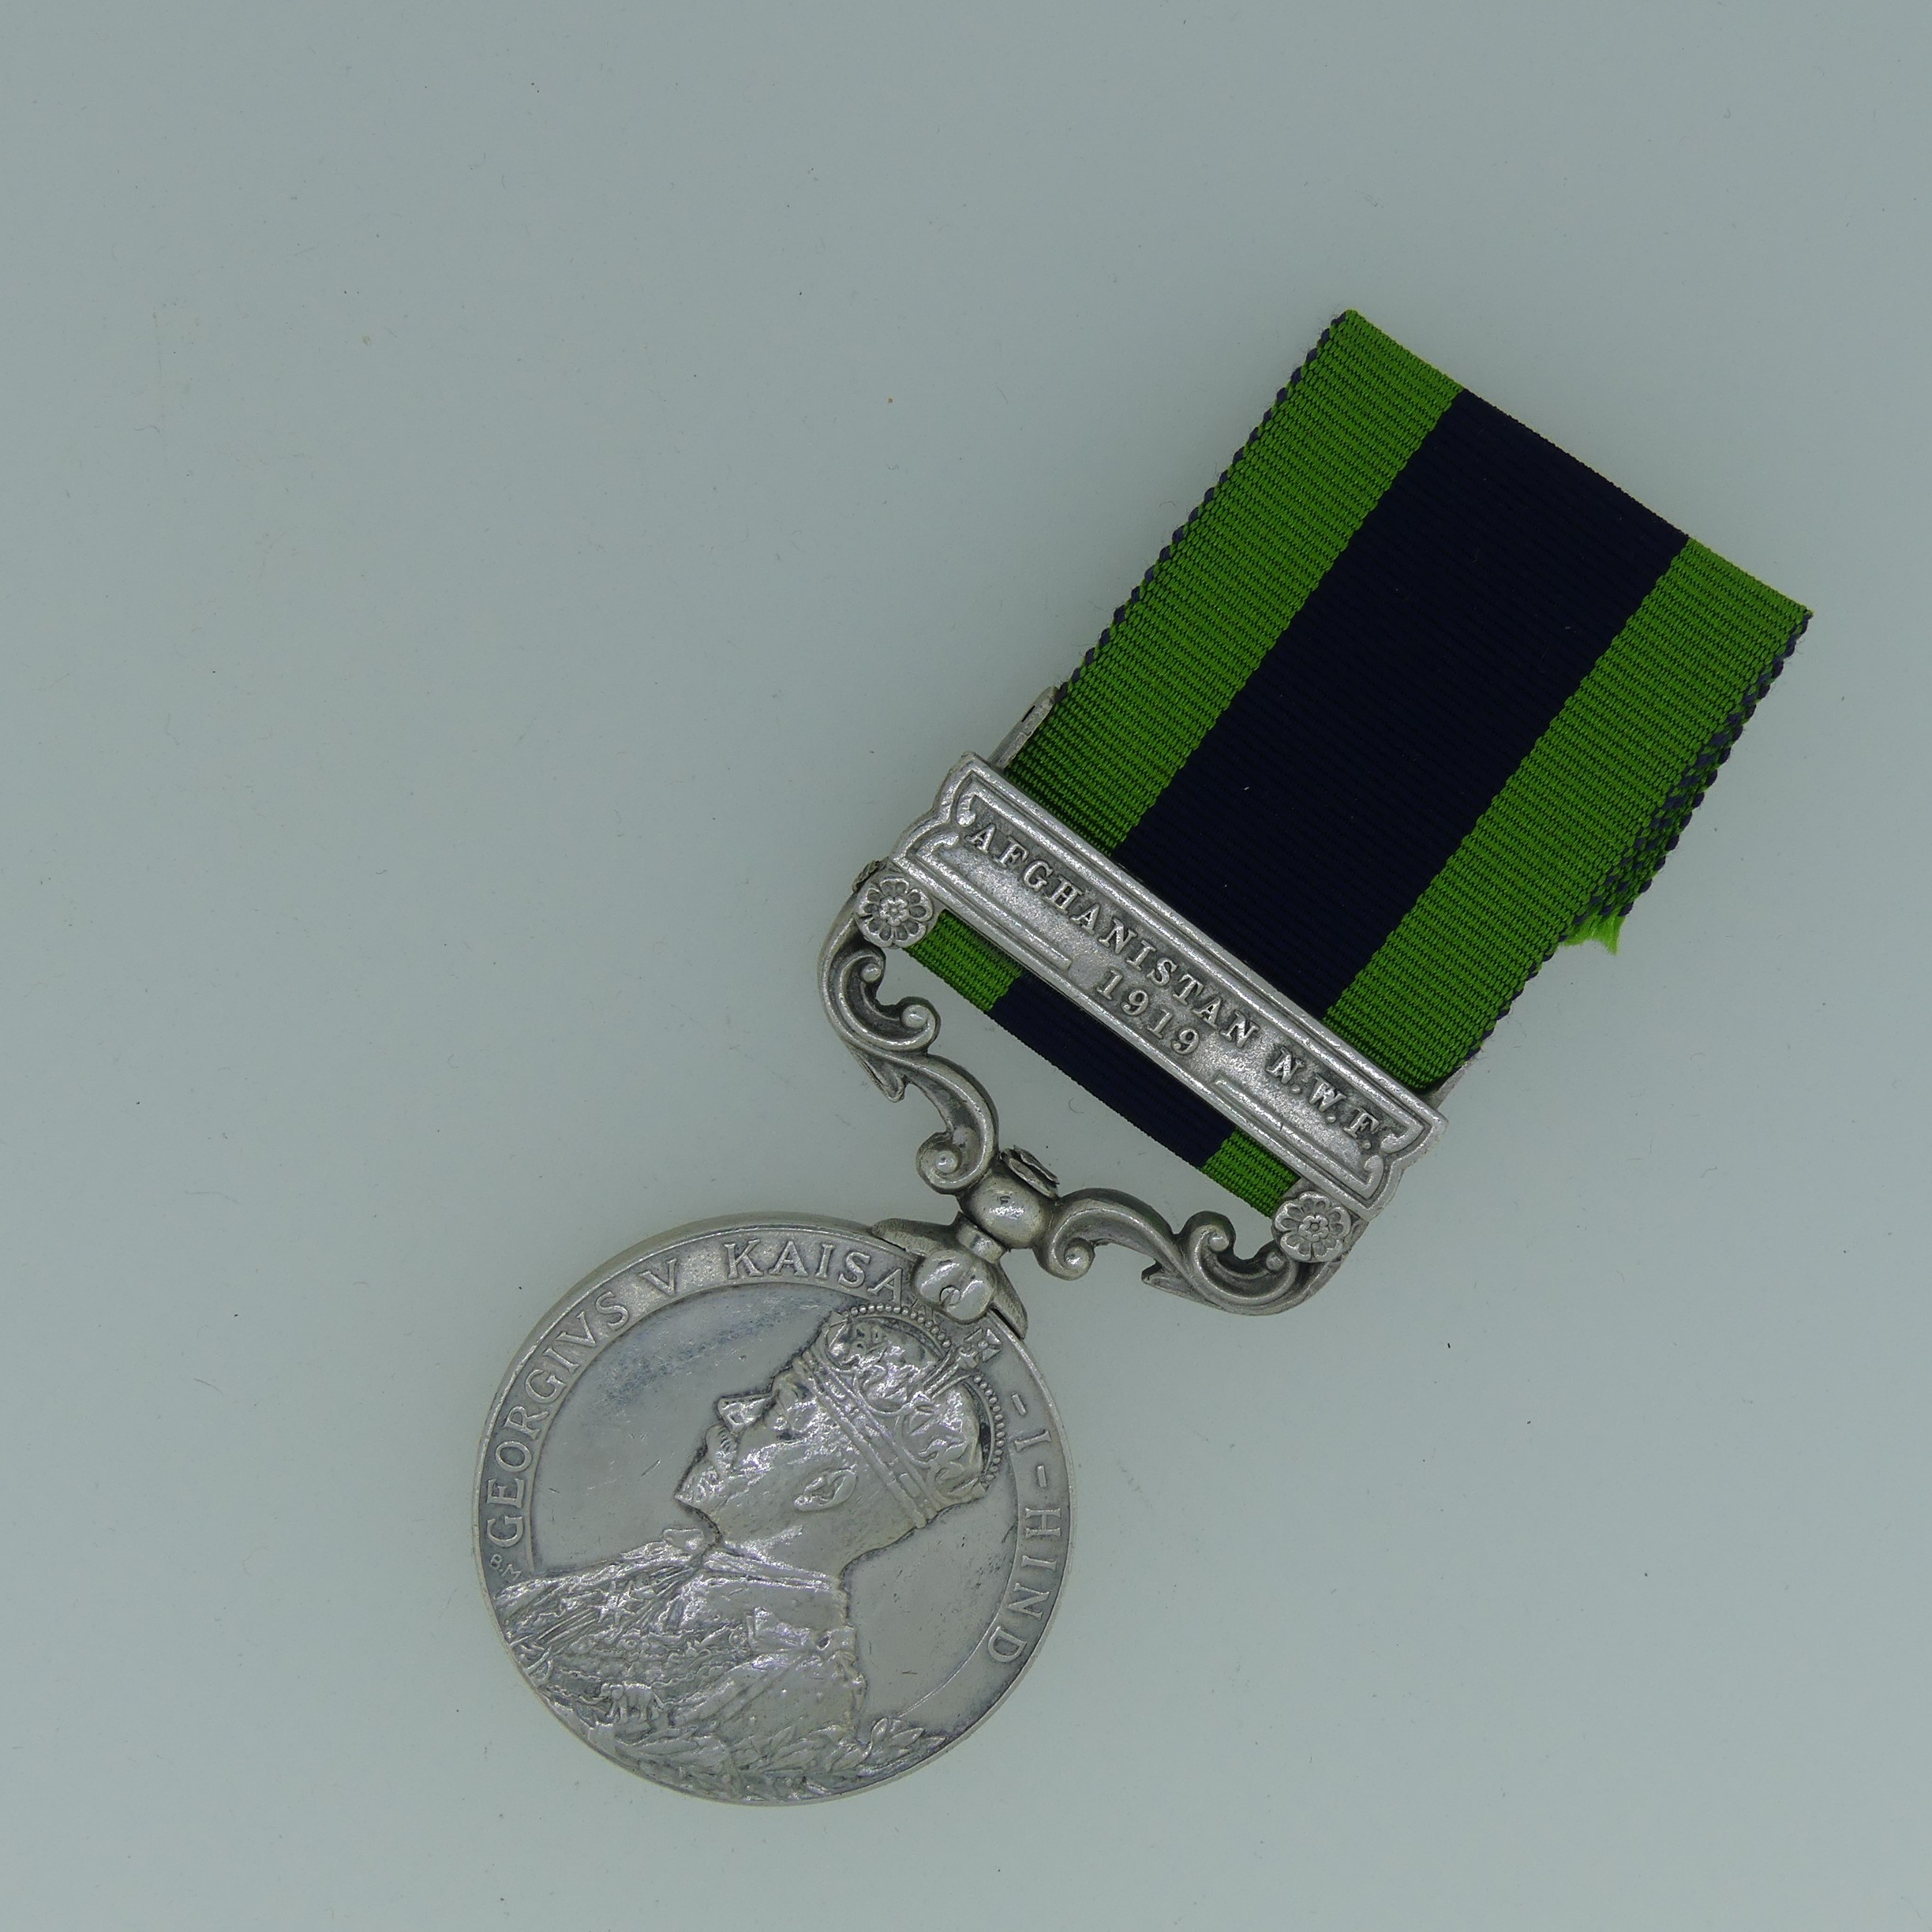 India General Service Medal, 1909, One clasp (Afghanistan NWF 1919) 916 Nk Abdul Qadir 1-107 Pnrs. - Image 2 of 5